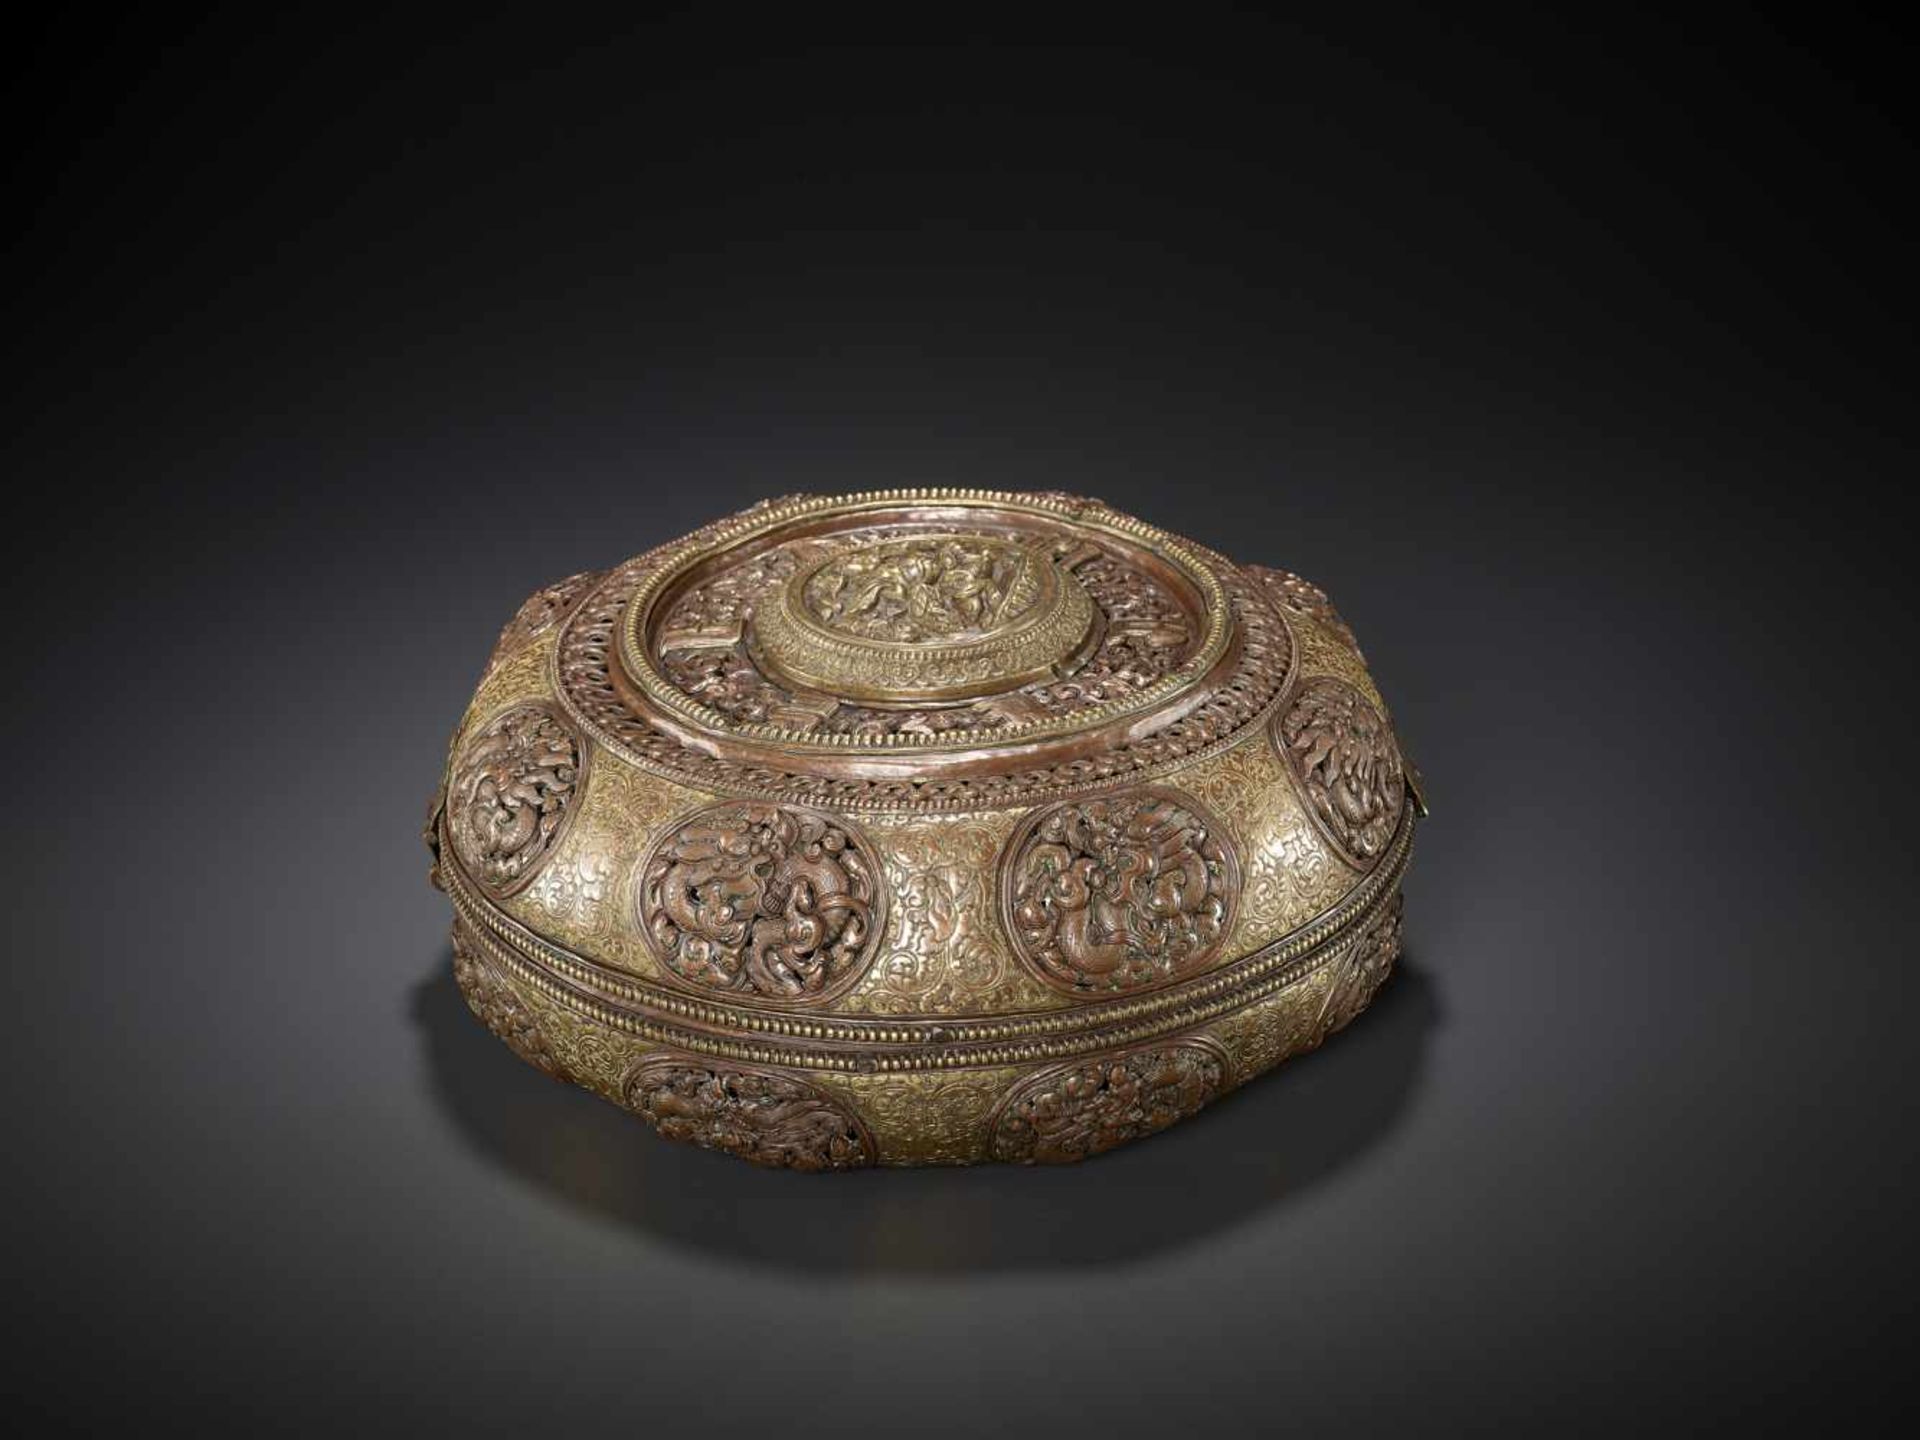 A GILT COPPER REPOUSSÉ RICE CONTAINER Tibet, 17th – 18th century. Finely engraved, embossed and - Image 9 of 9